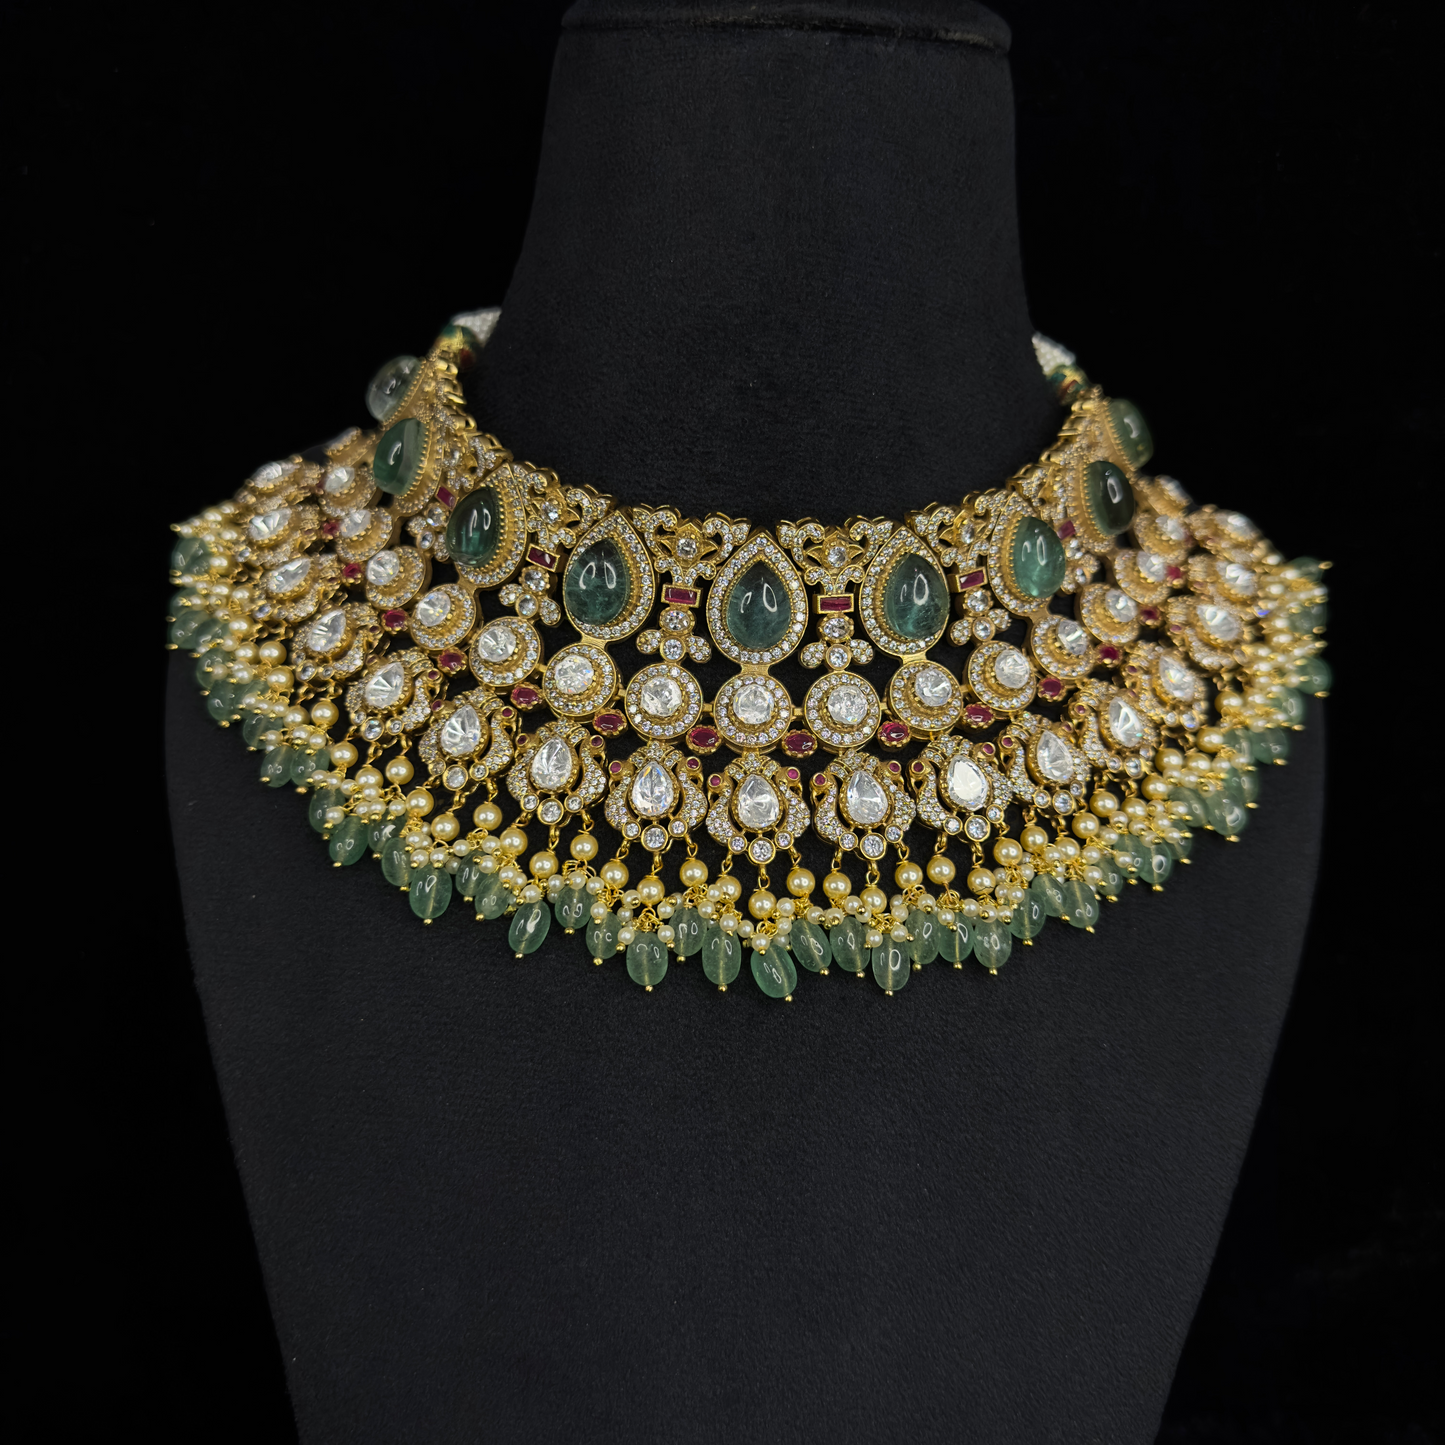 Moissanite Victorian Choker Set with maang tikka, zircon, moissanite polki stones, pearls, and beads, including matching earrings. This Victorian Jewellery is available in Mint,Green & Pink colour variants.